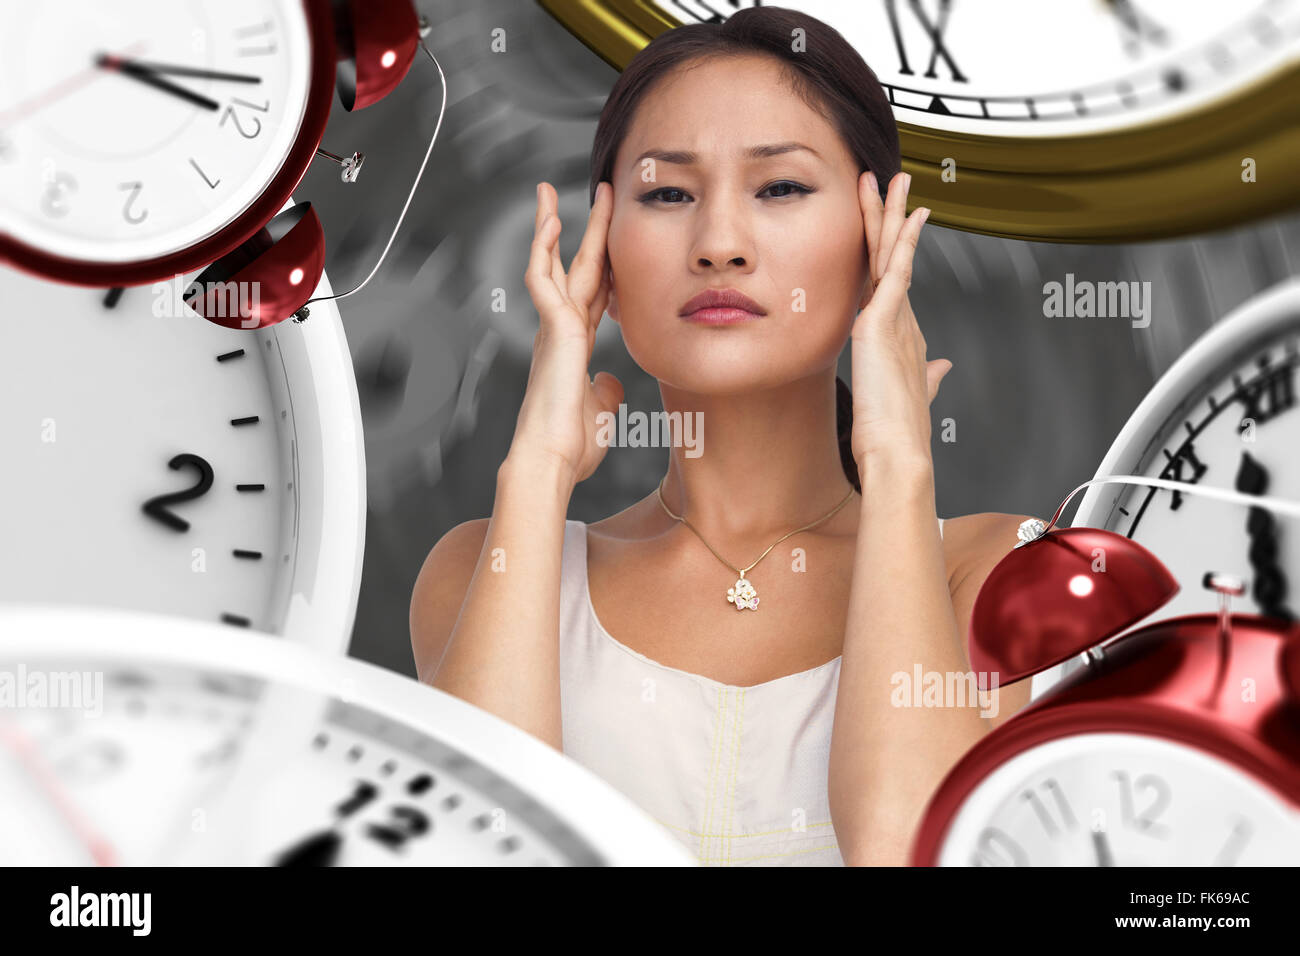 Composite image of concerned woman posing and looking at camera Stock Photo